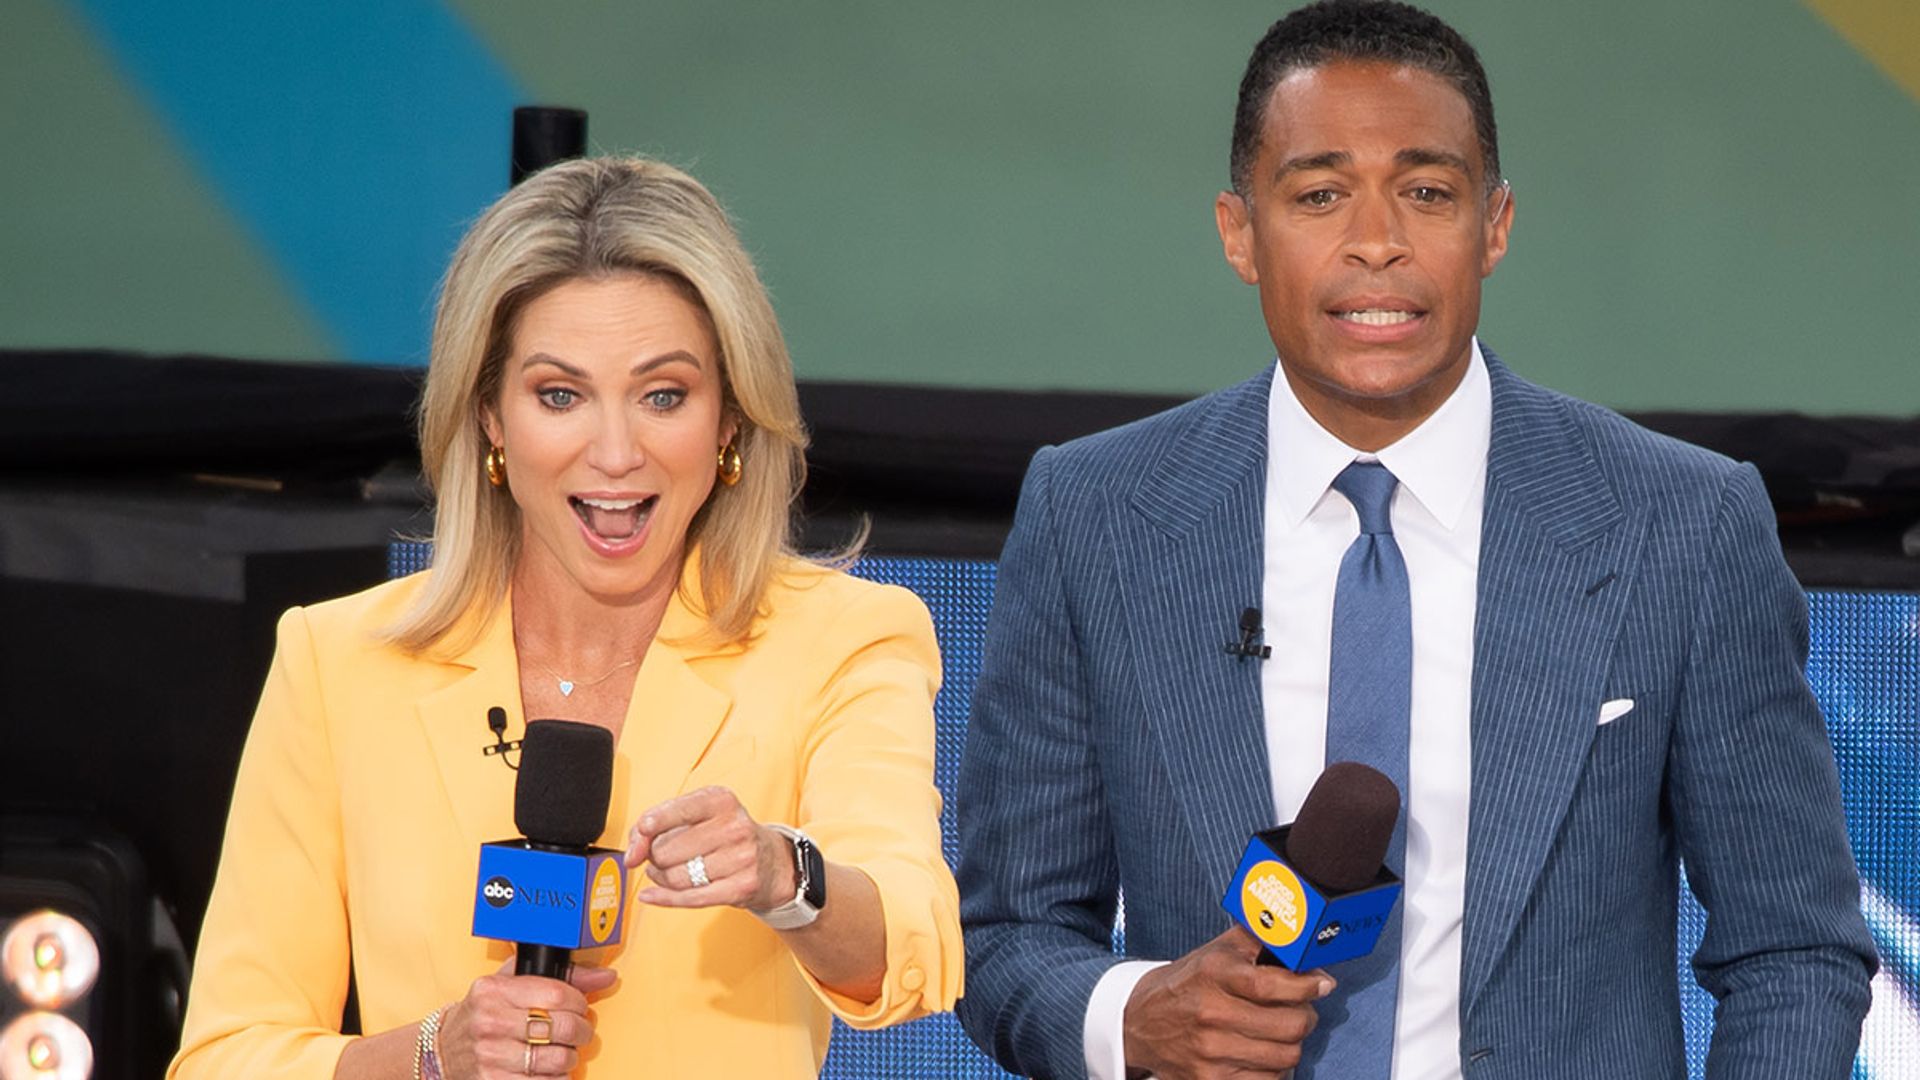 GMA3 viewers are all saying the same thing about Amy Robach and T.J. Holmes' departure